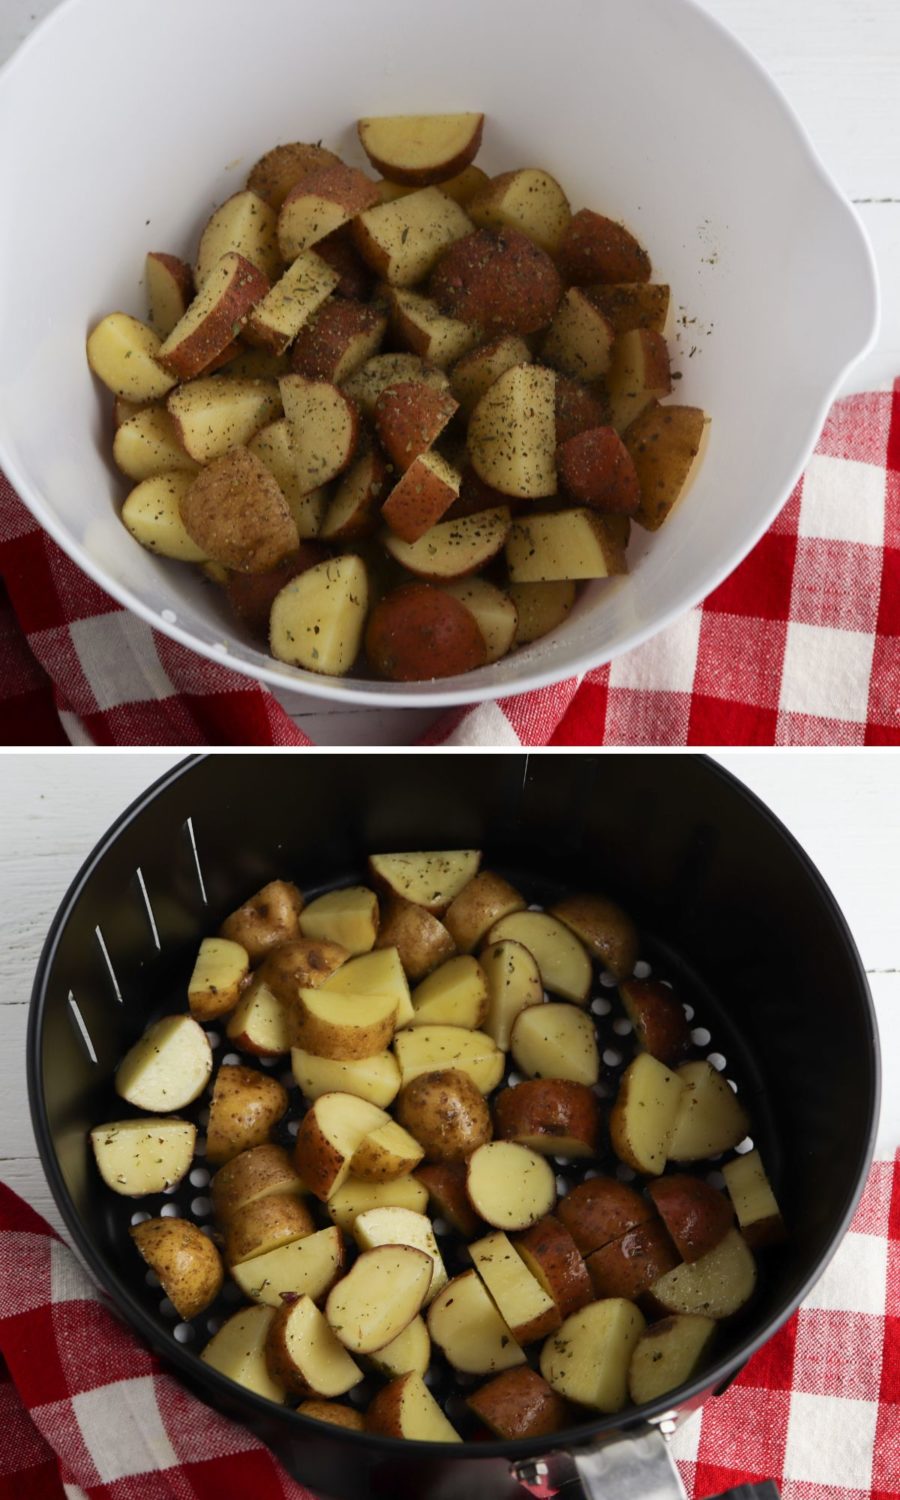 Two pictures of potatoes being cooked in a pan.